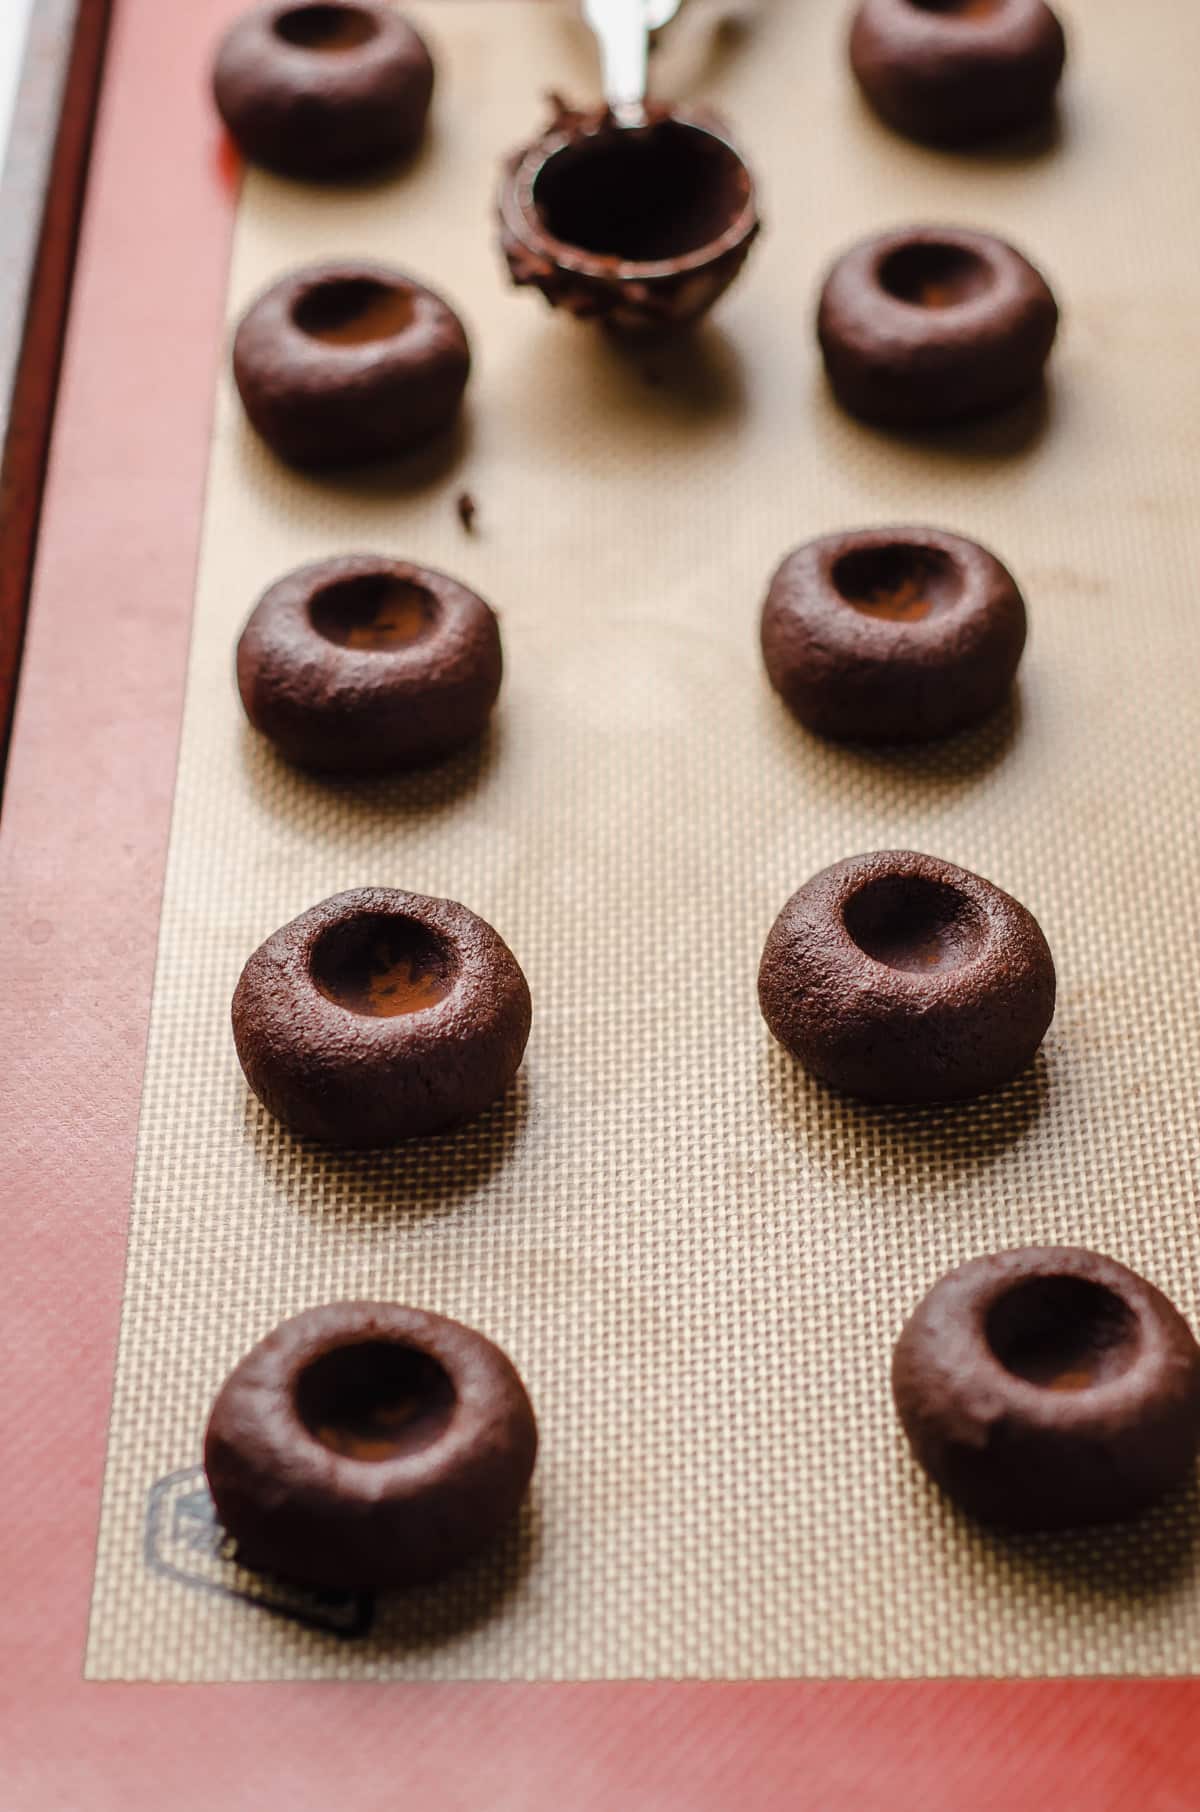 chocolate thumbprint cookies on a baking sheet ready to be baked